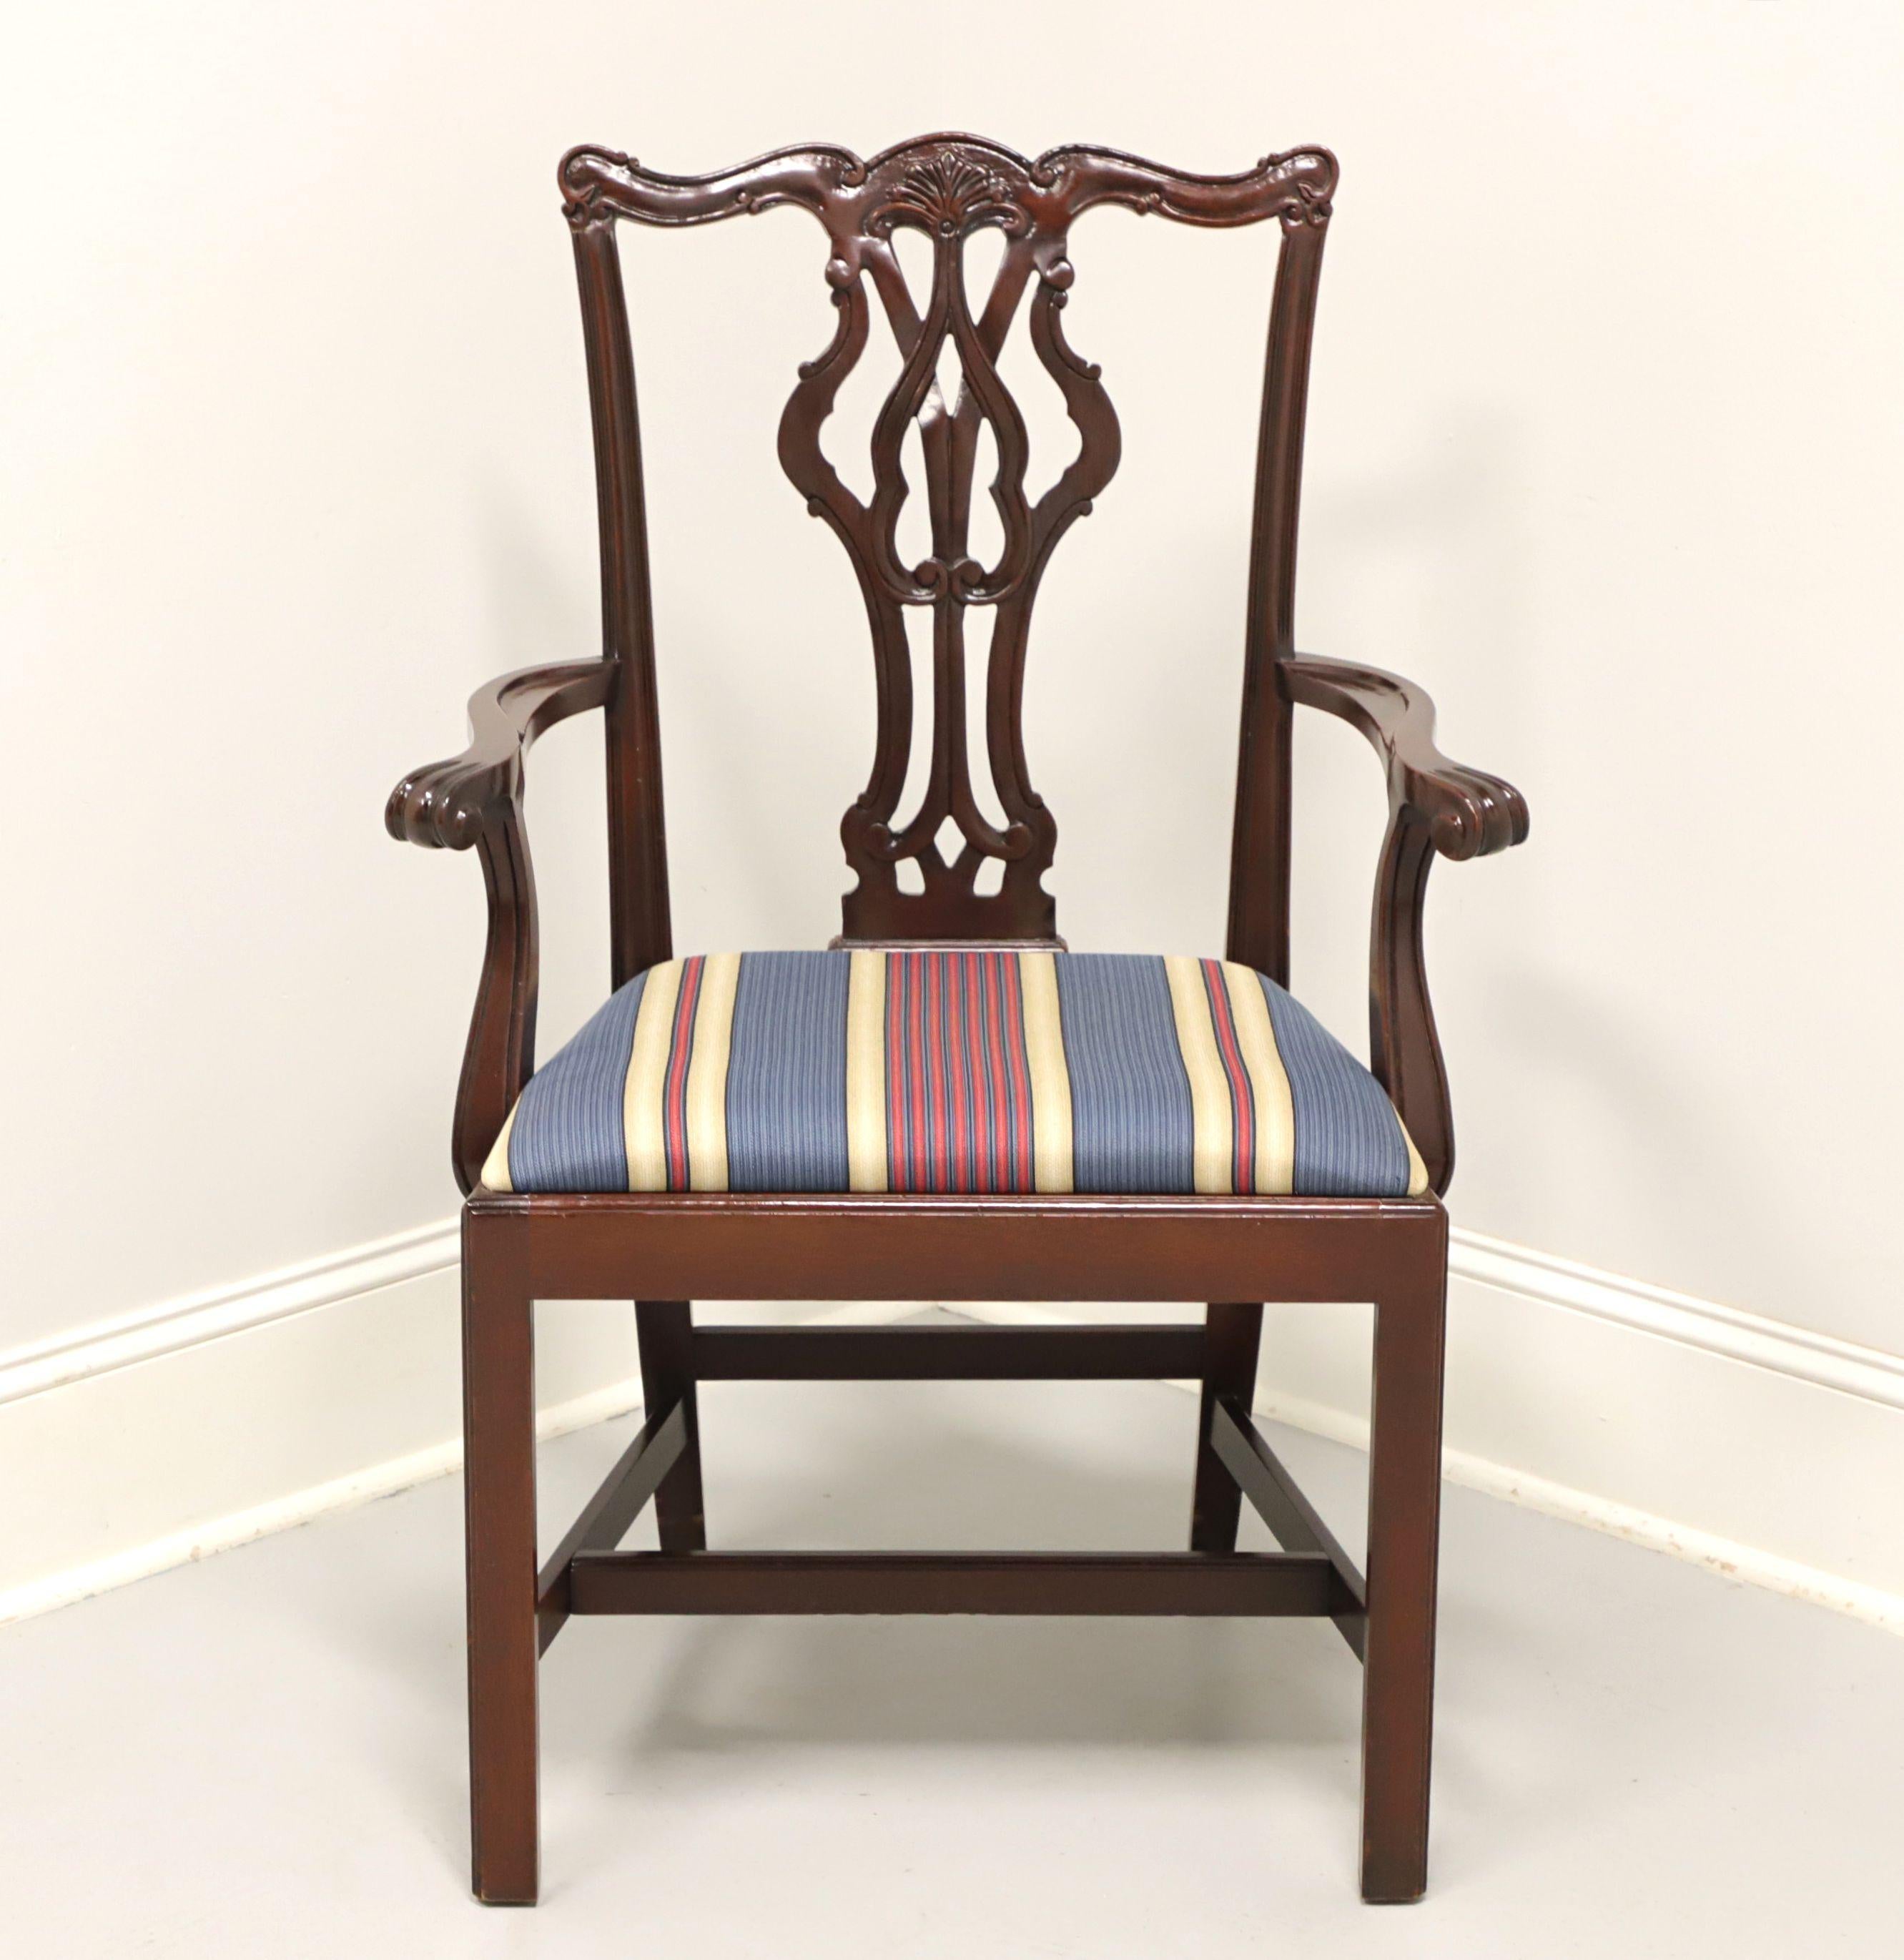 A Chippendale style armchair by Bernhardt. Solid mahogany with elaborately carved crest rail & backrest, curved arms with arched supports, straight legs, and stretcher base. Blue, pink and beige stripe pattern fabric upholstered seat. Made in the